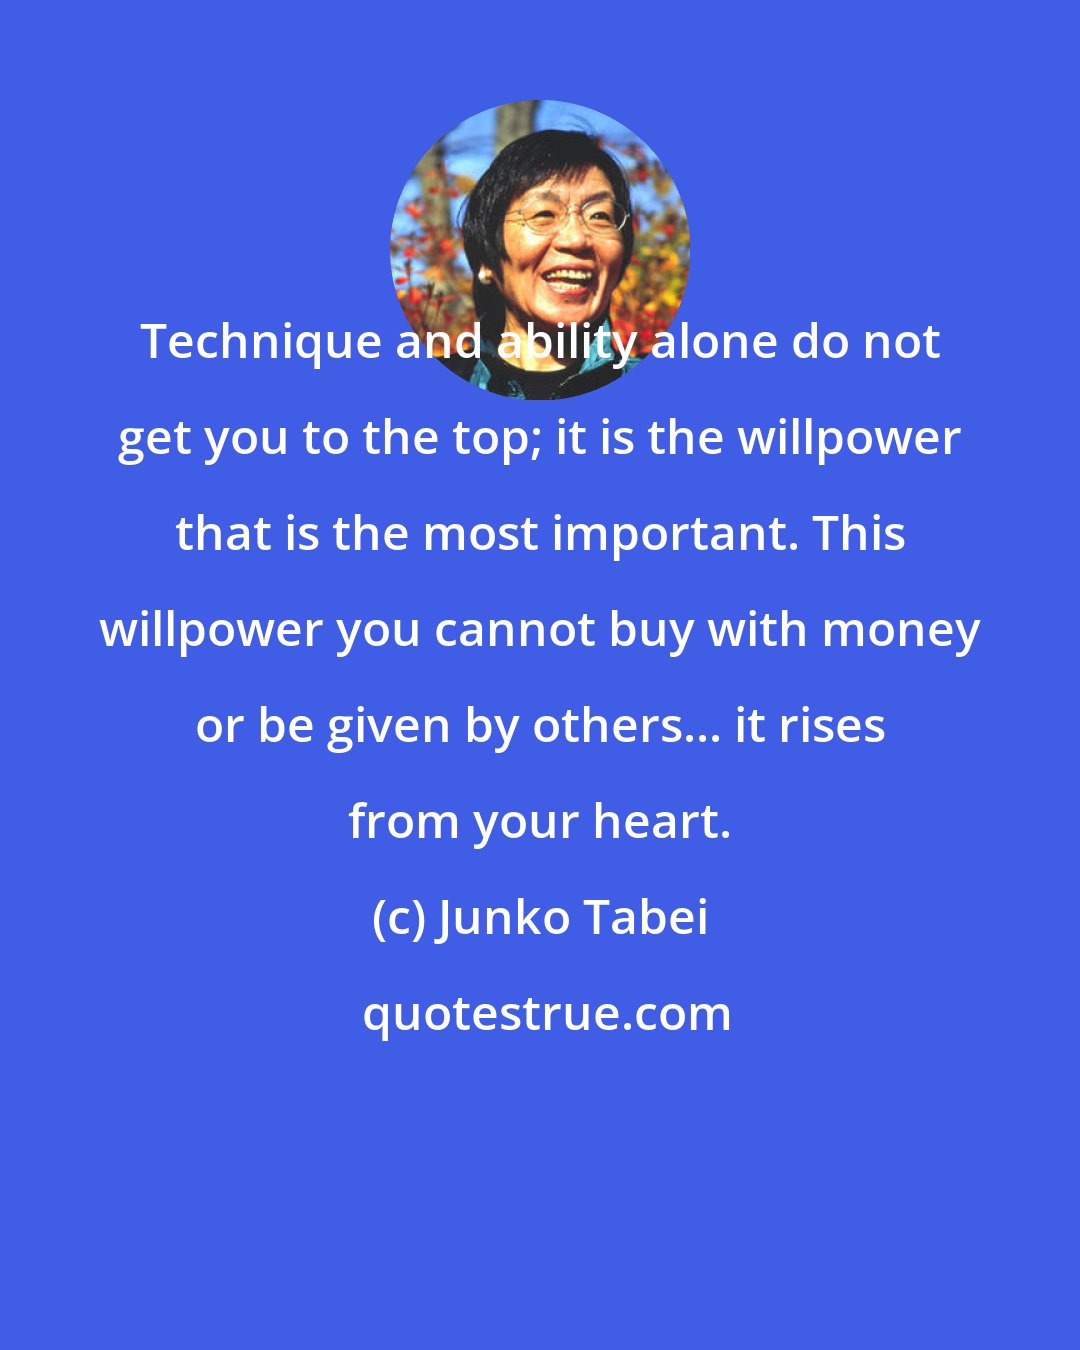 Junko Tabei: Technique and ability alone do not get you to the top; it is the willpower that is the most important. This willpower you cannot buy with money or be given by others... it rises from your heart.